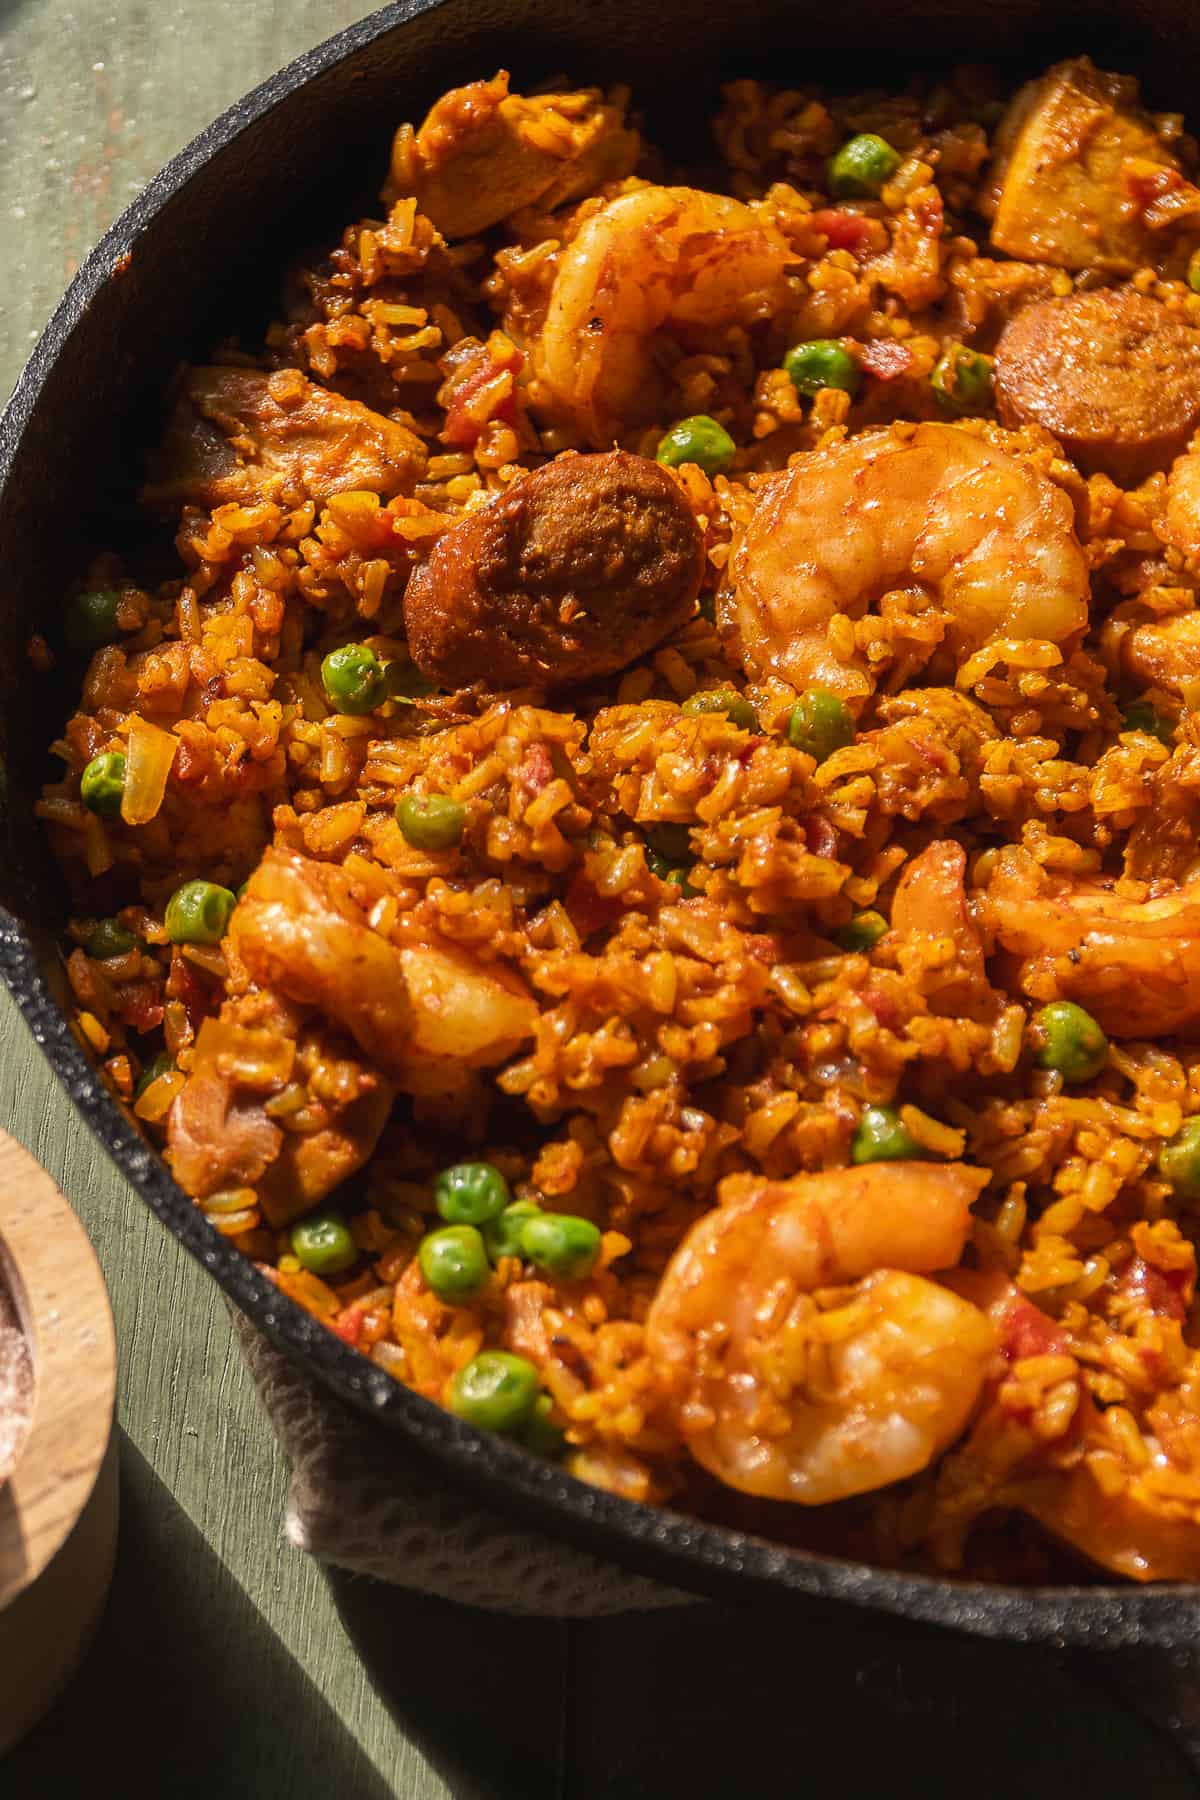 Chorizo and shrimp brown rice paella in a cast iron skillet.